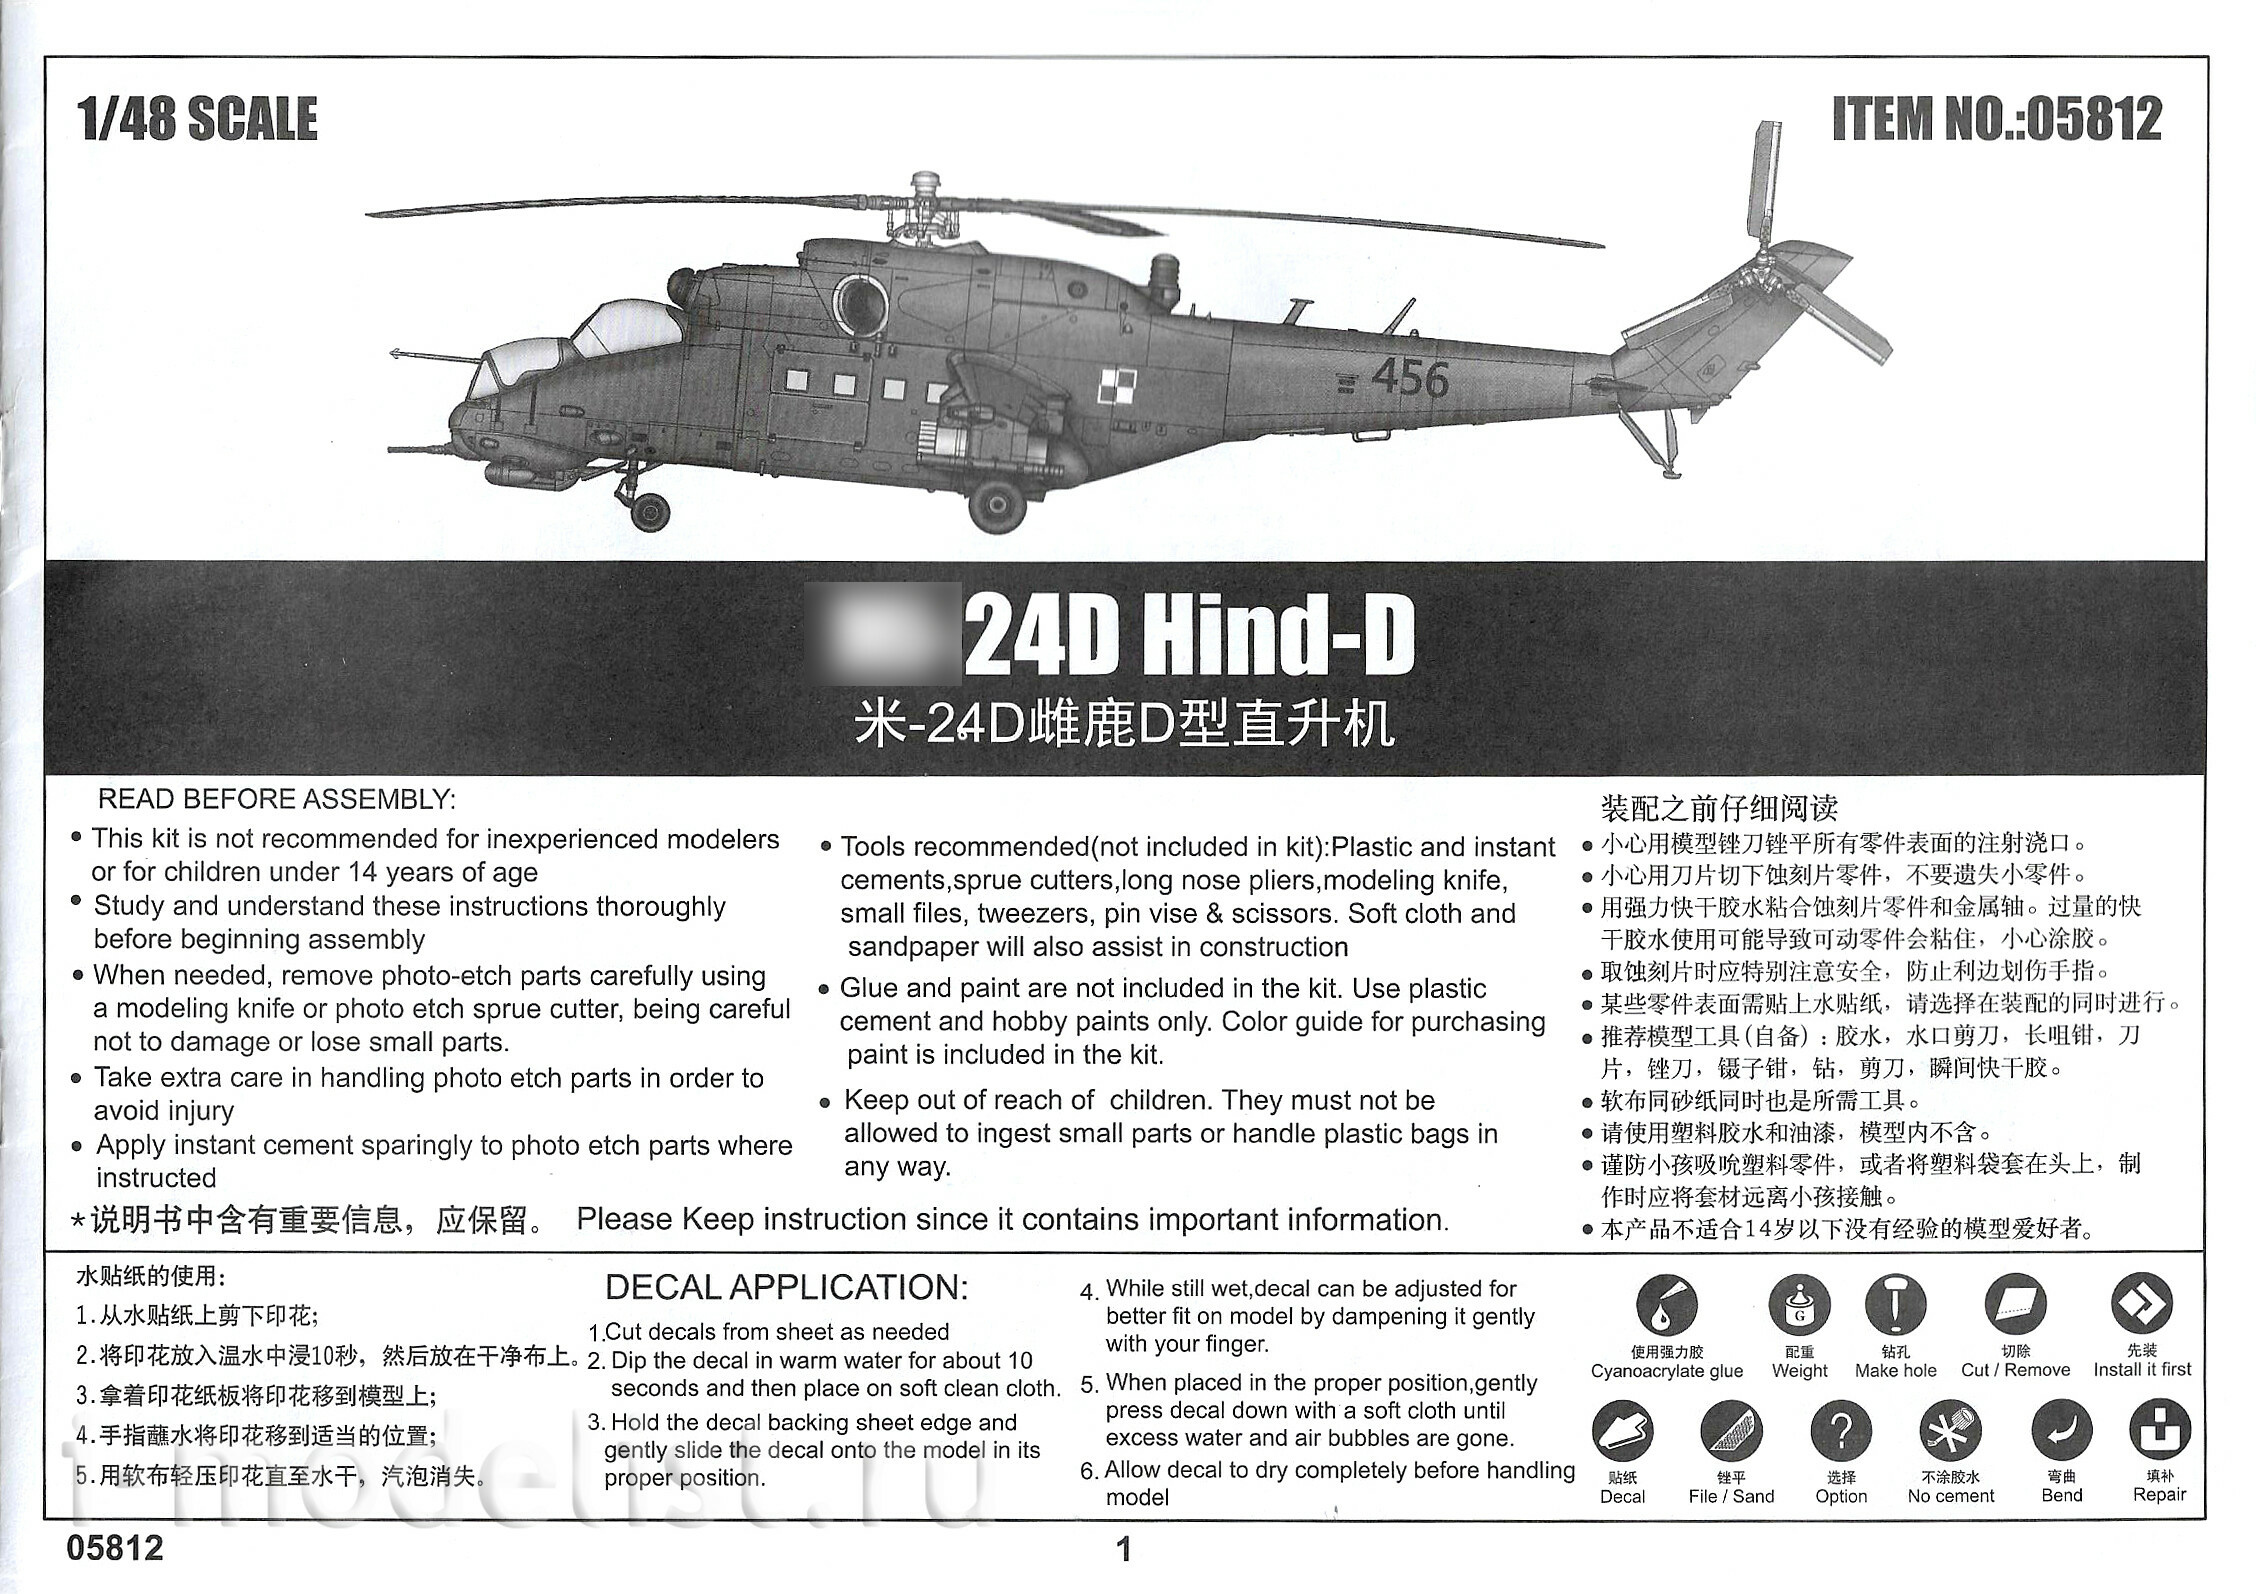 05812 Trumpeter 1/48 Helicopter Mi-24D 